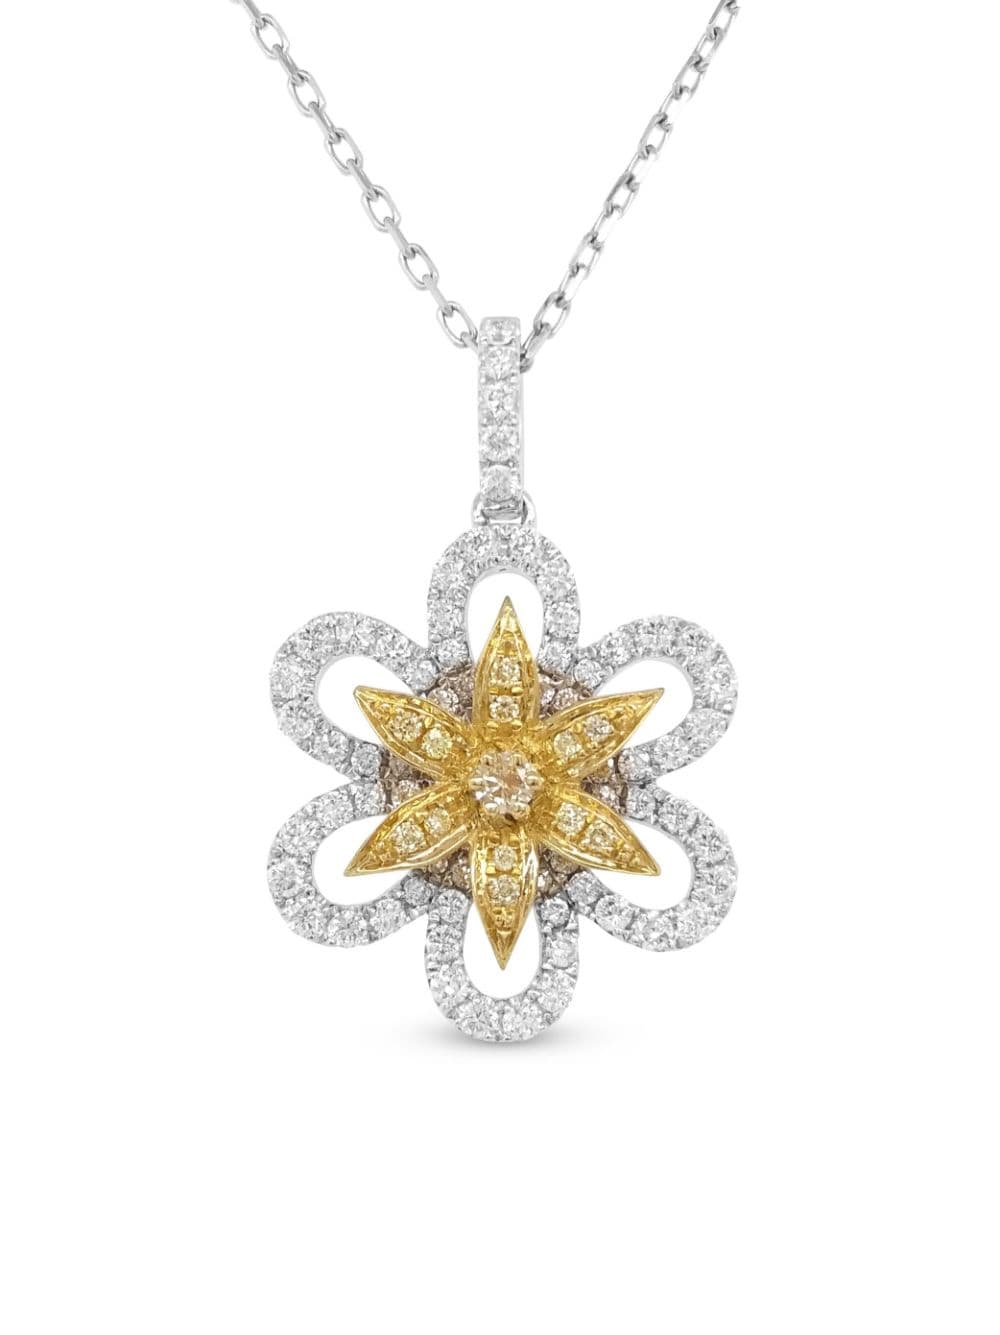 HYT Jewelry 18kt yellow and white gold diamond necklace - Silver von HYT Jewelry